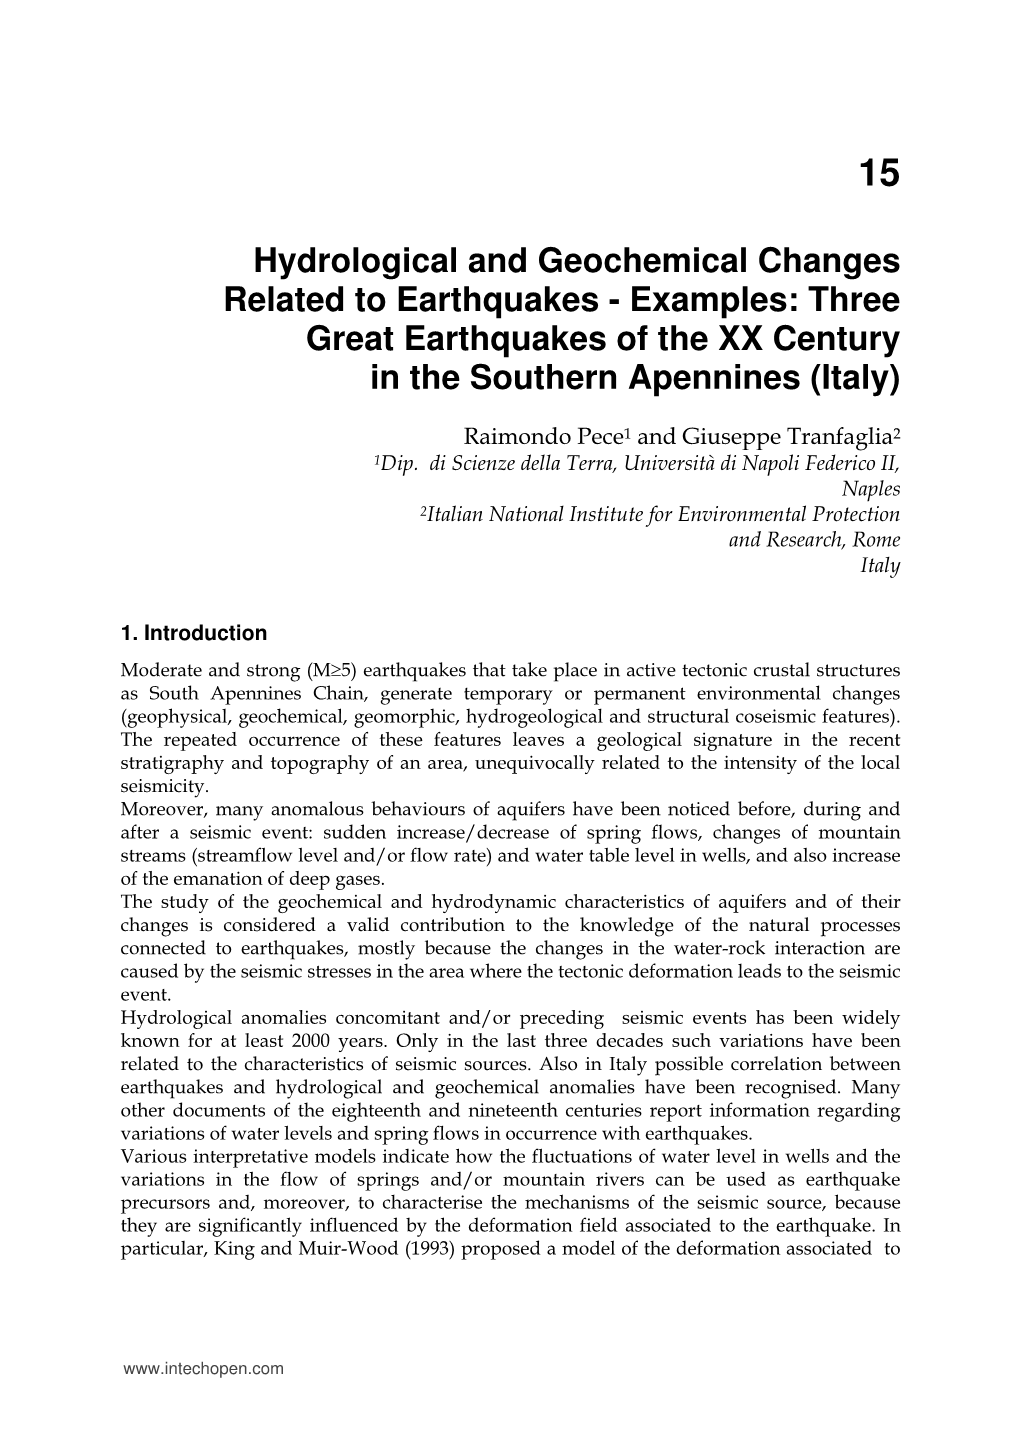 Hydrological and Geochemical Changes Related to Earthquakes - Examples: Three Great Earthquakes of the XX Century in the Southern Apennines (Italy)